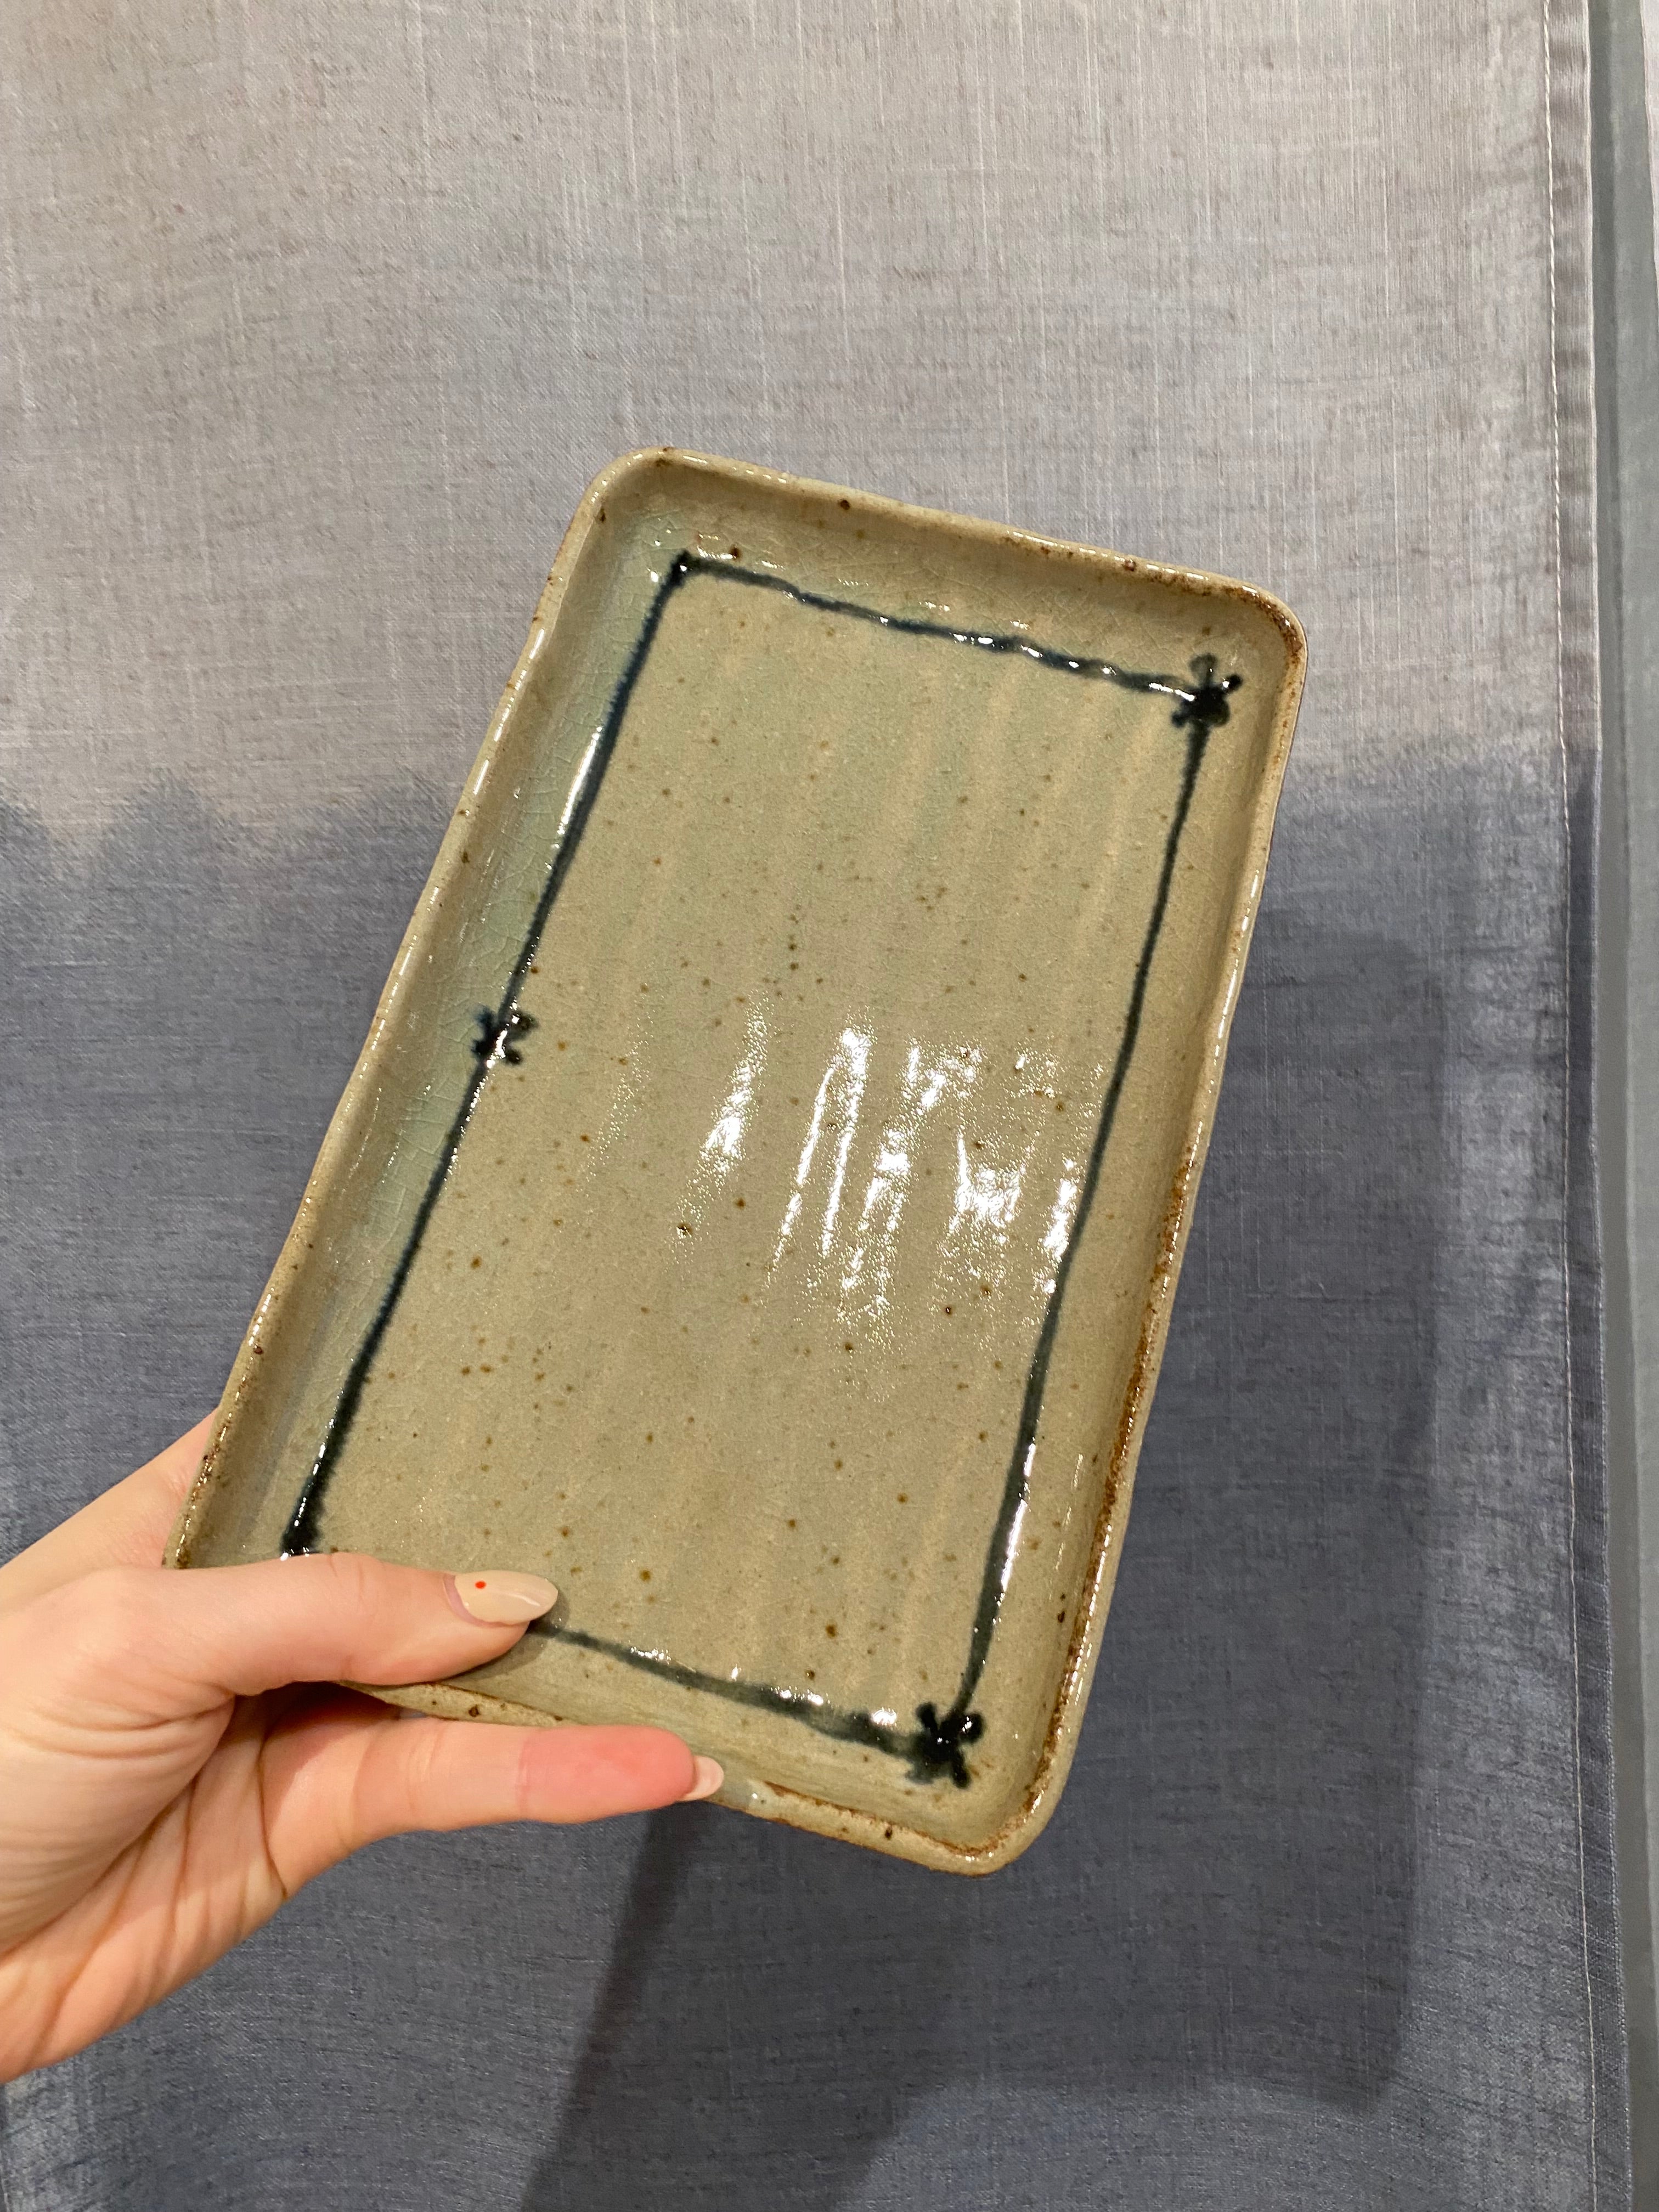 Square dish with green glaze and pattern details